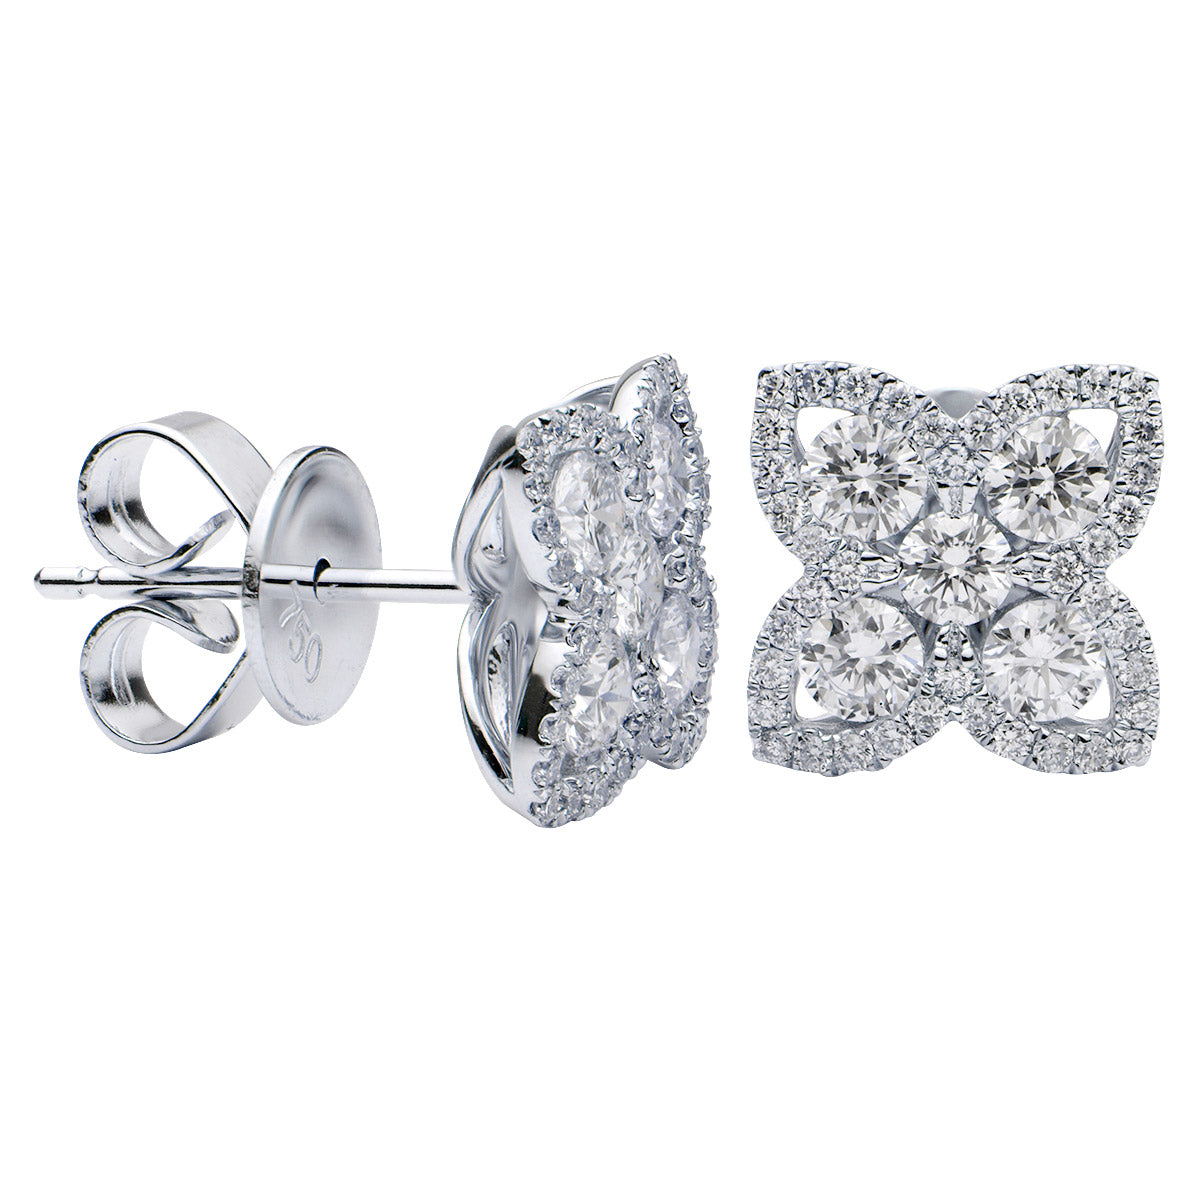 Flower stud earrings featuring clusters of round diamonds on 18K white gold